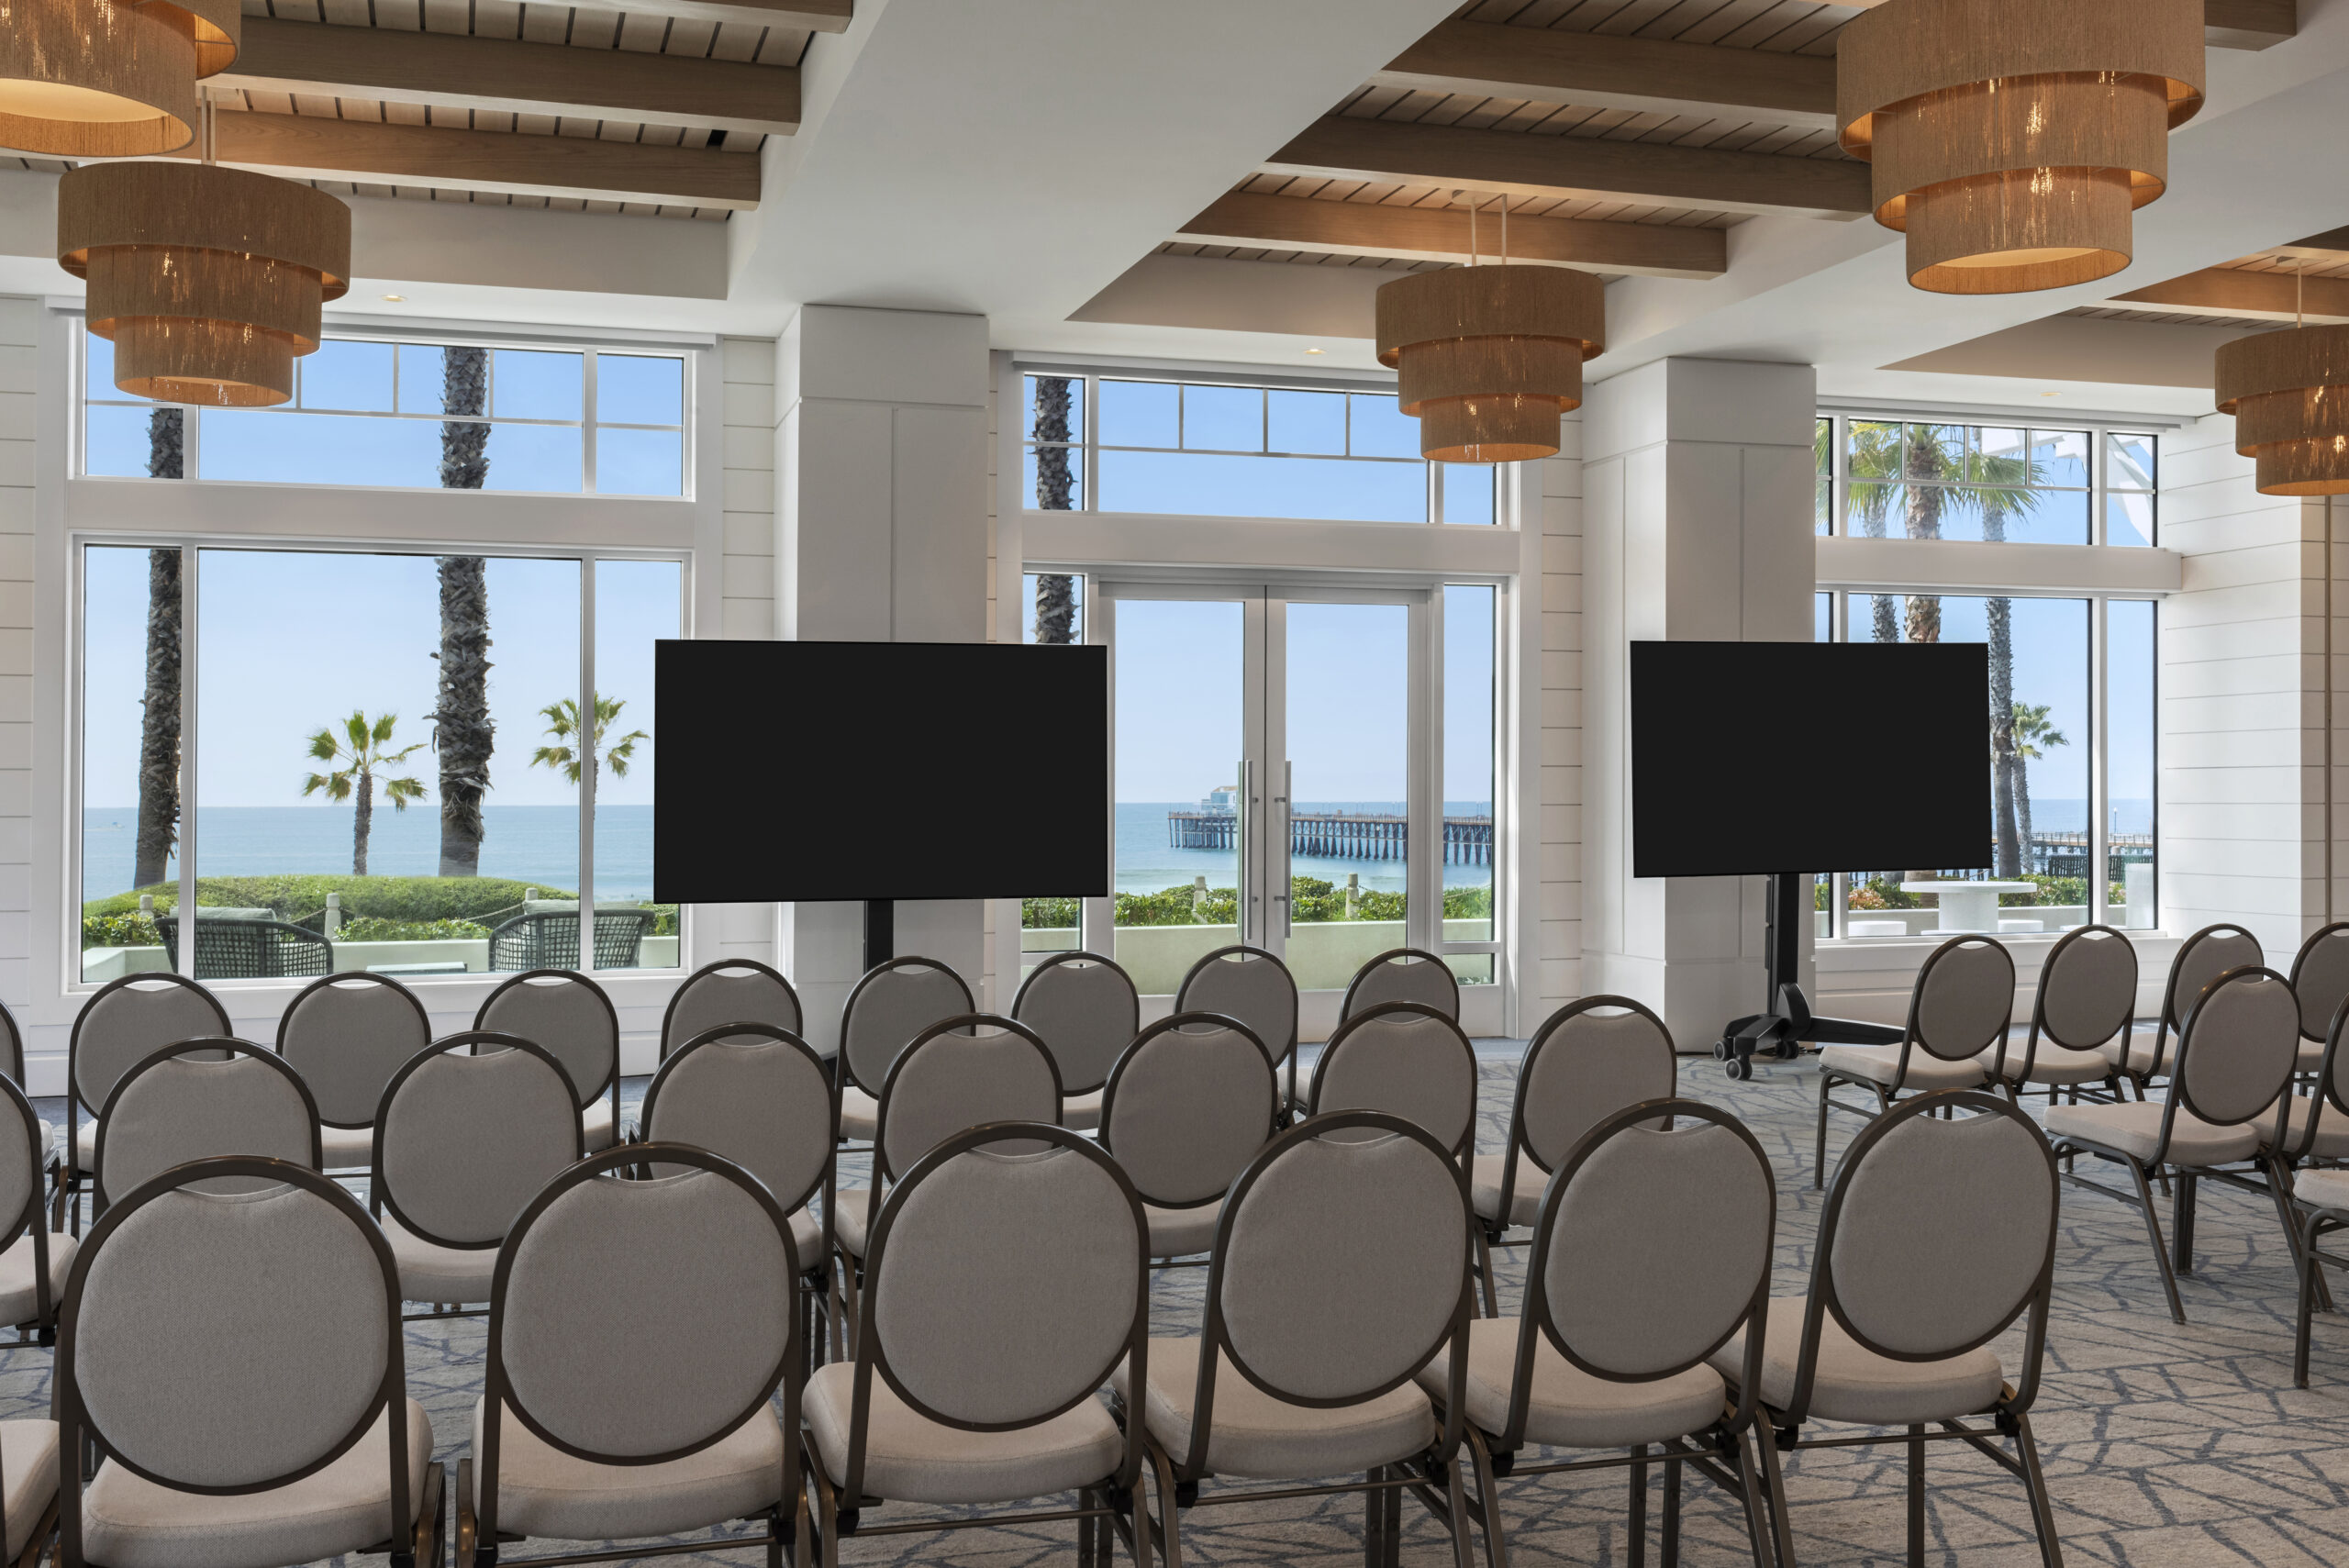 Seagaze meeting space set with TV screen